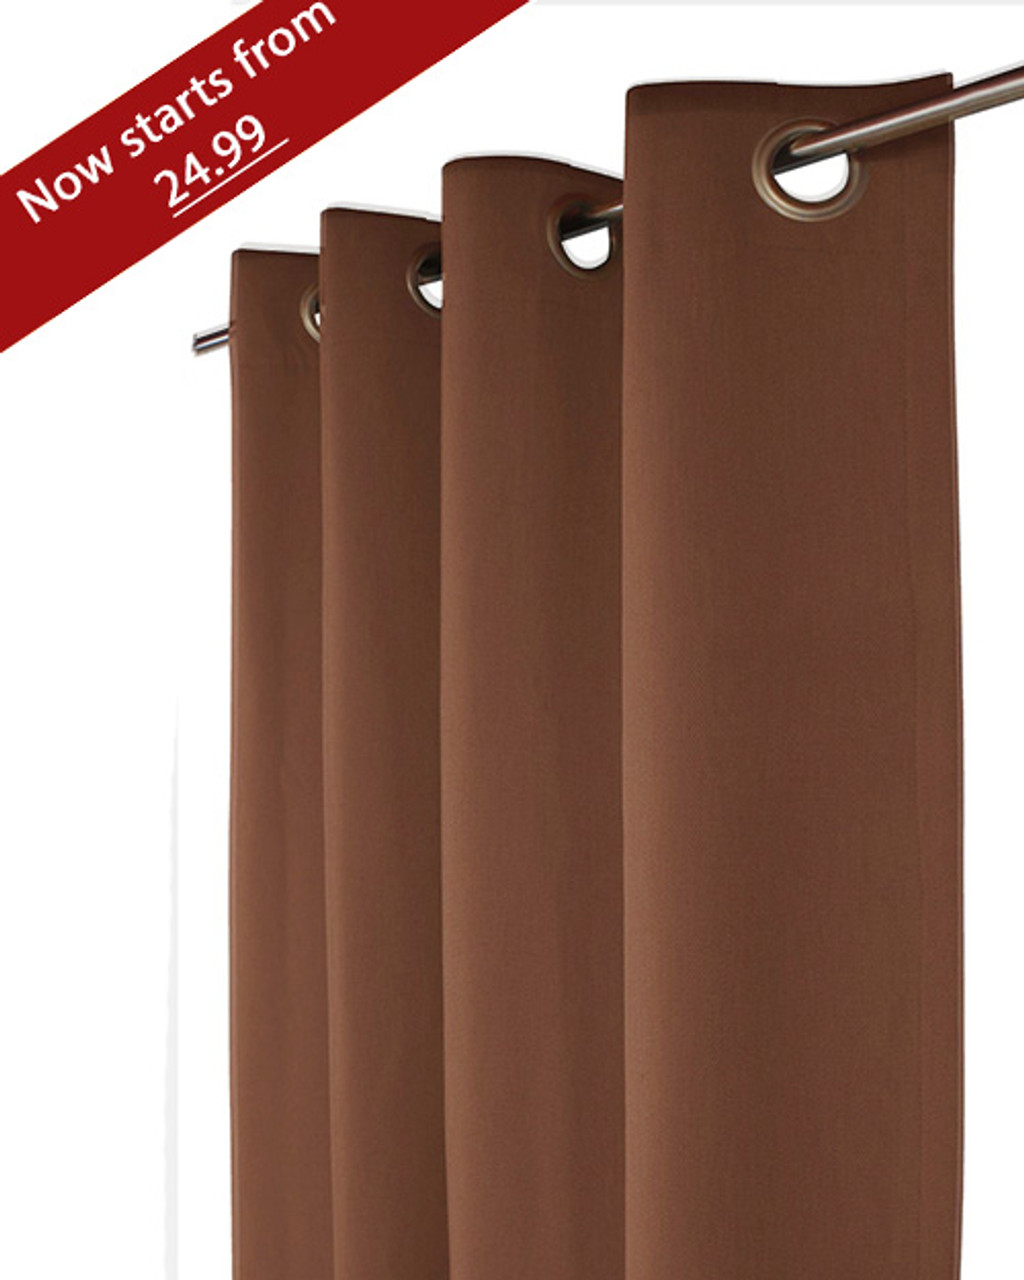 Light out curtain Grommet Top plain Design-Copper -Polyester- 56x96 inches-30